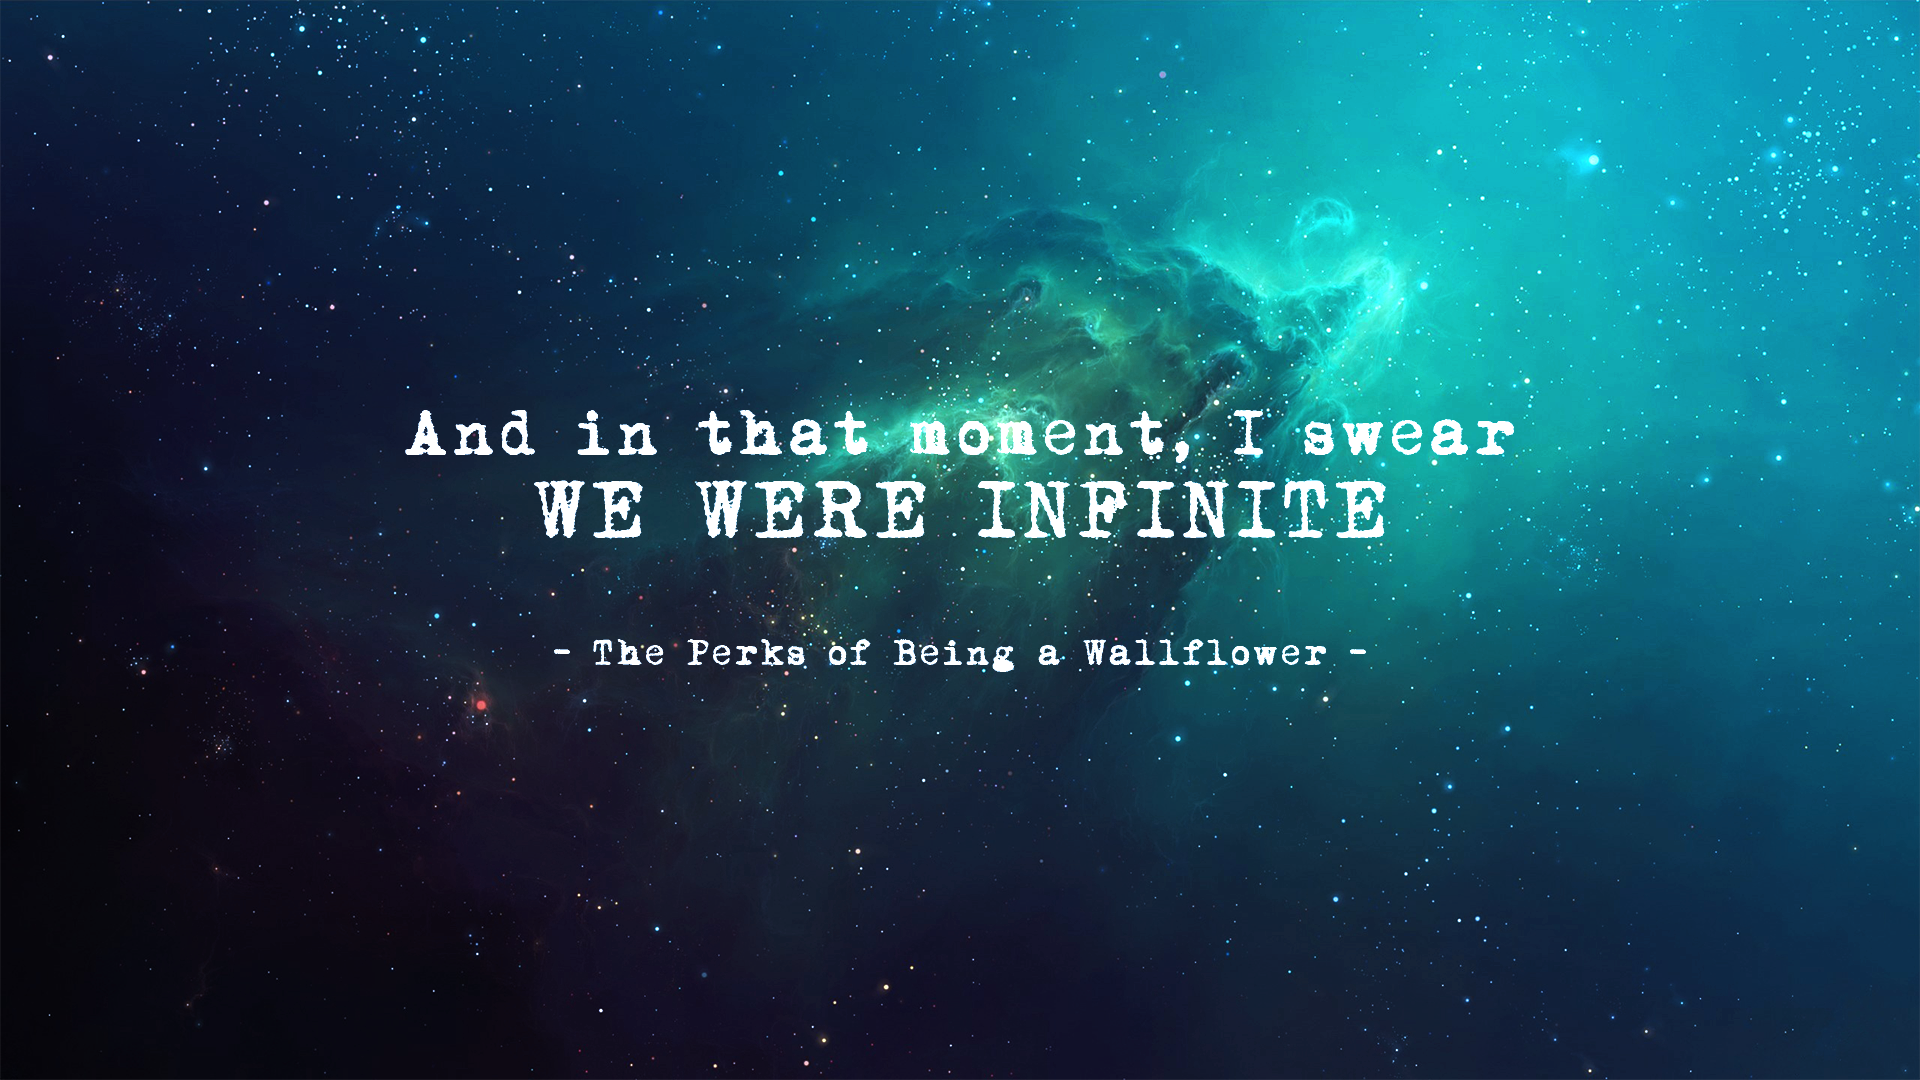 General 1920x1080 The Perks of Being a Wallflower universe quote turquoise